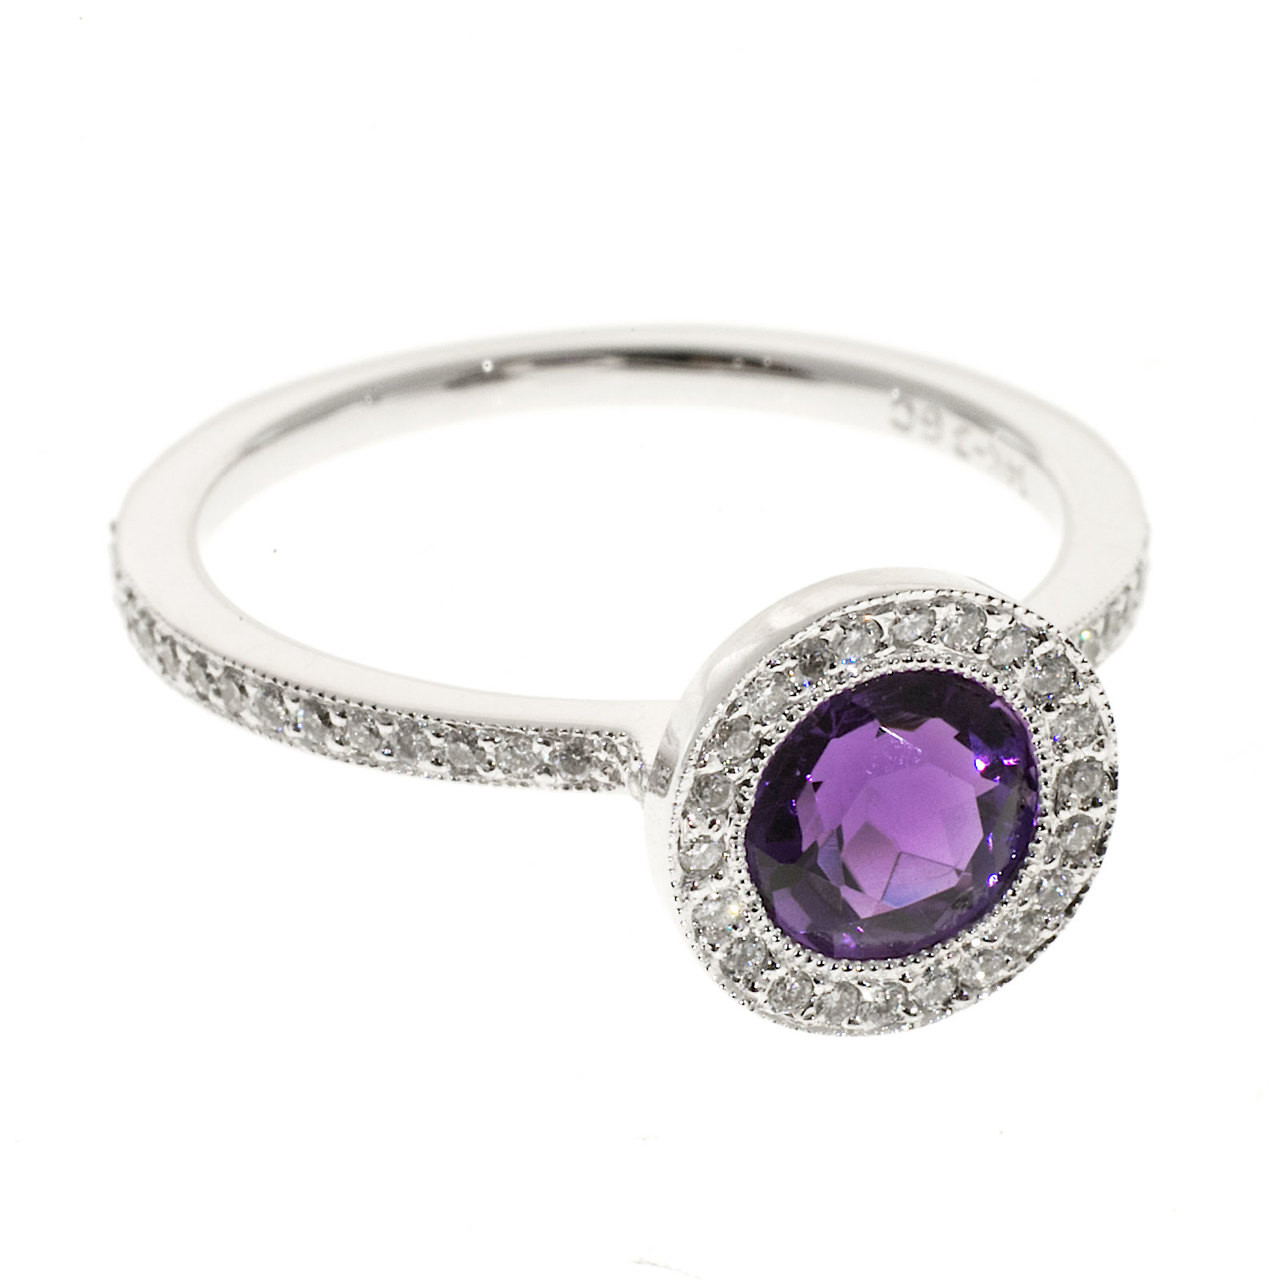 Vintage GC 14K White Gold .25CT Full Cut Micro Pave .50CT Amethyst Ring